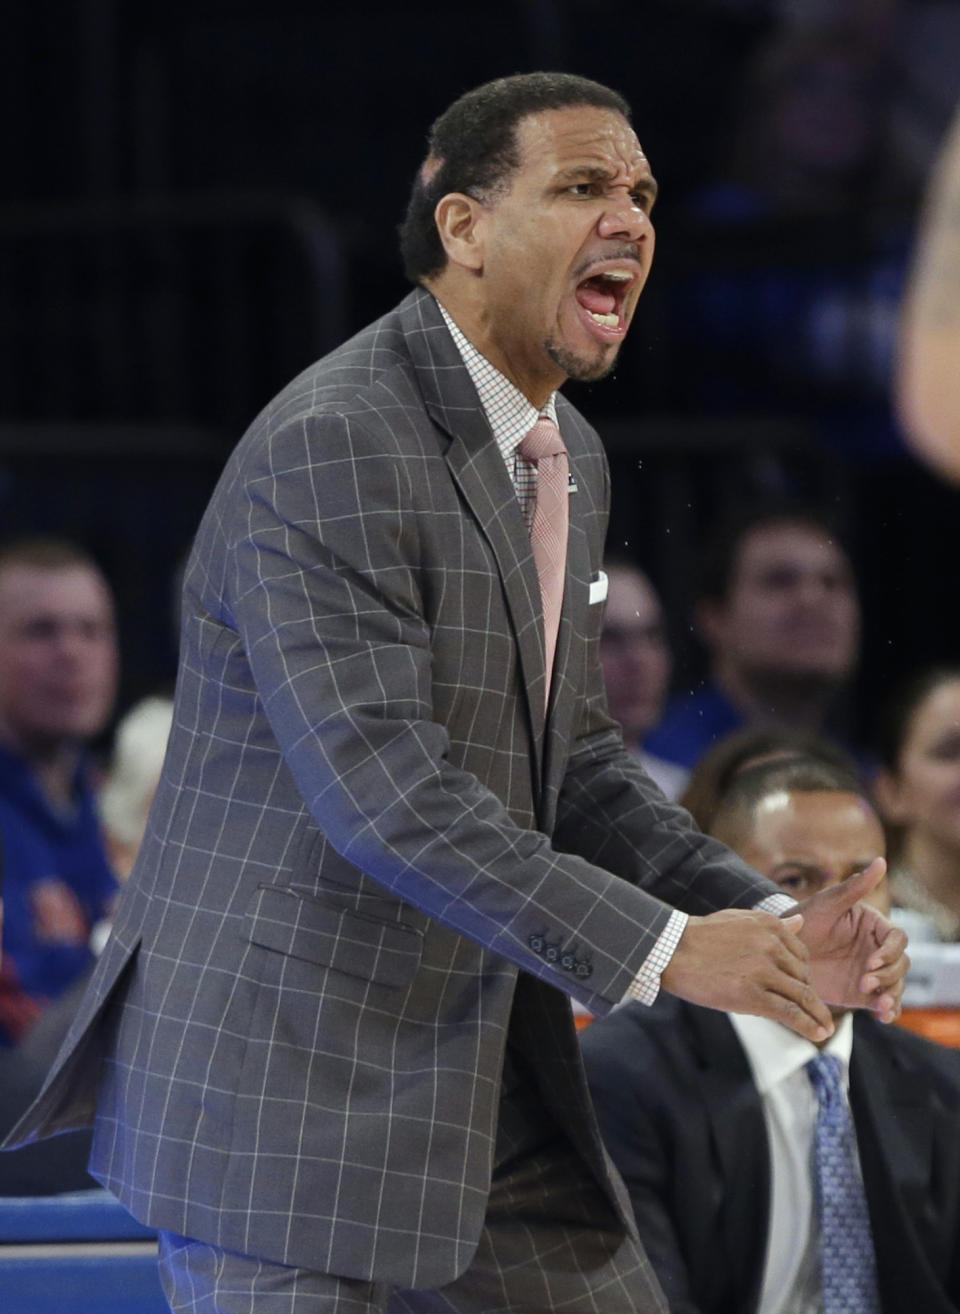 Providence coach Ed Cooley calls out to his team during the first half of an NCAA college basketball game against Seton Hall in the semifinals of the Big East Conference men's tournament Friday, March 14, 2014, at Madison Square Garden in New York. (AP Photo/Frank Franklin II)